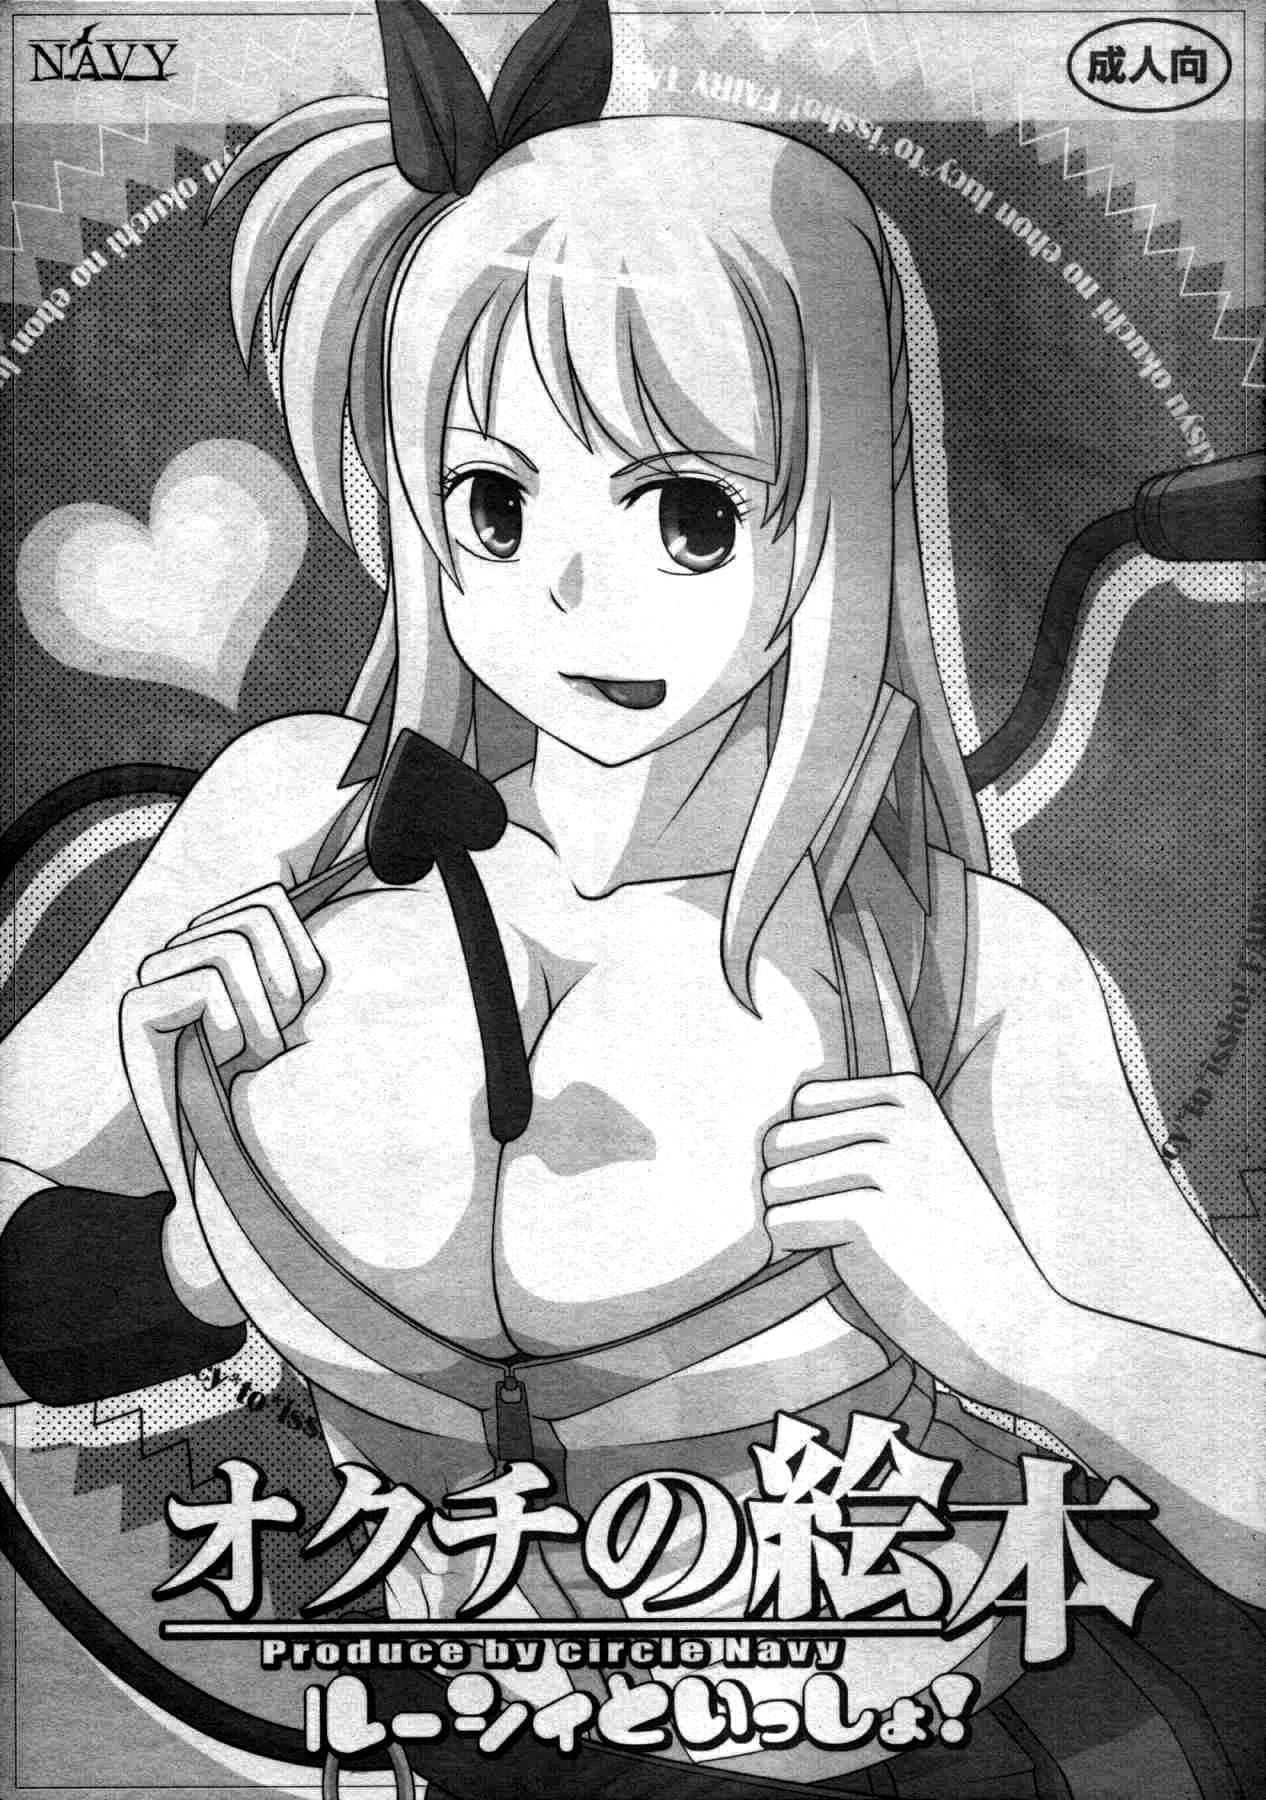 [NAVY (Kisyuu Naoyuki)] Okuchi no Ehon -Lucy to Issho!- | Mouth’s Picture book -Featuring Lucy (Fairy Tail) [English] =LWB= 0